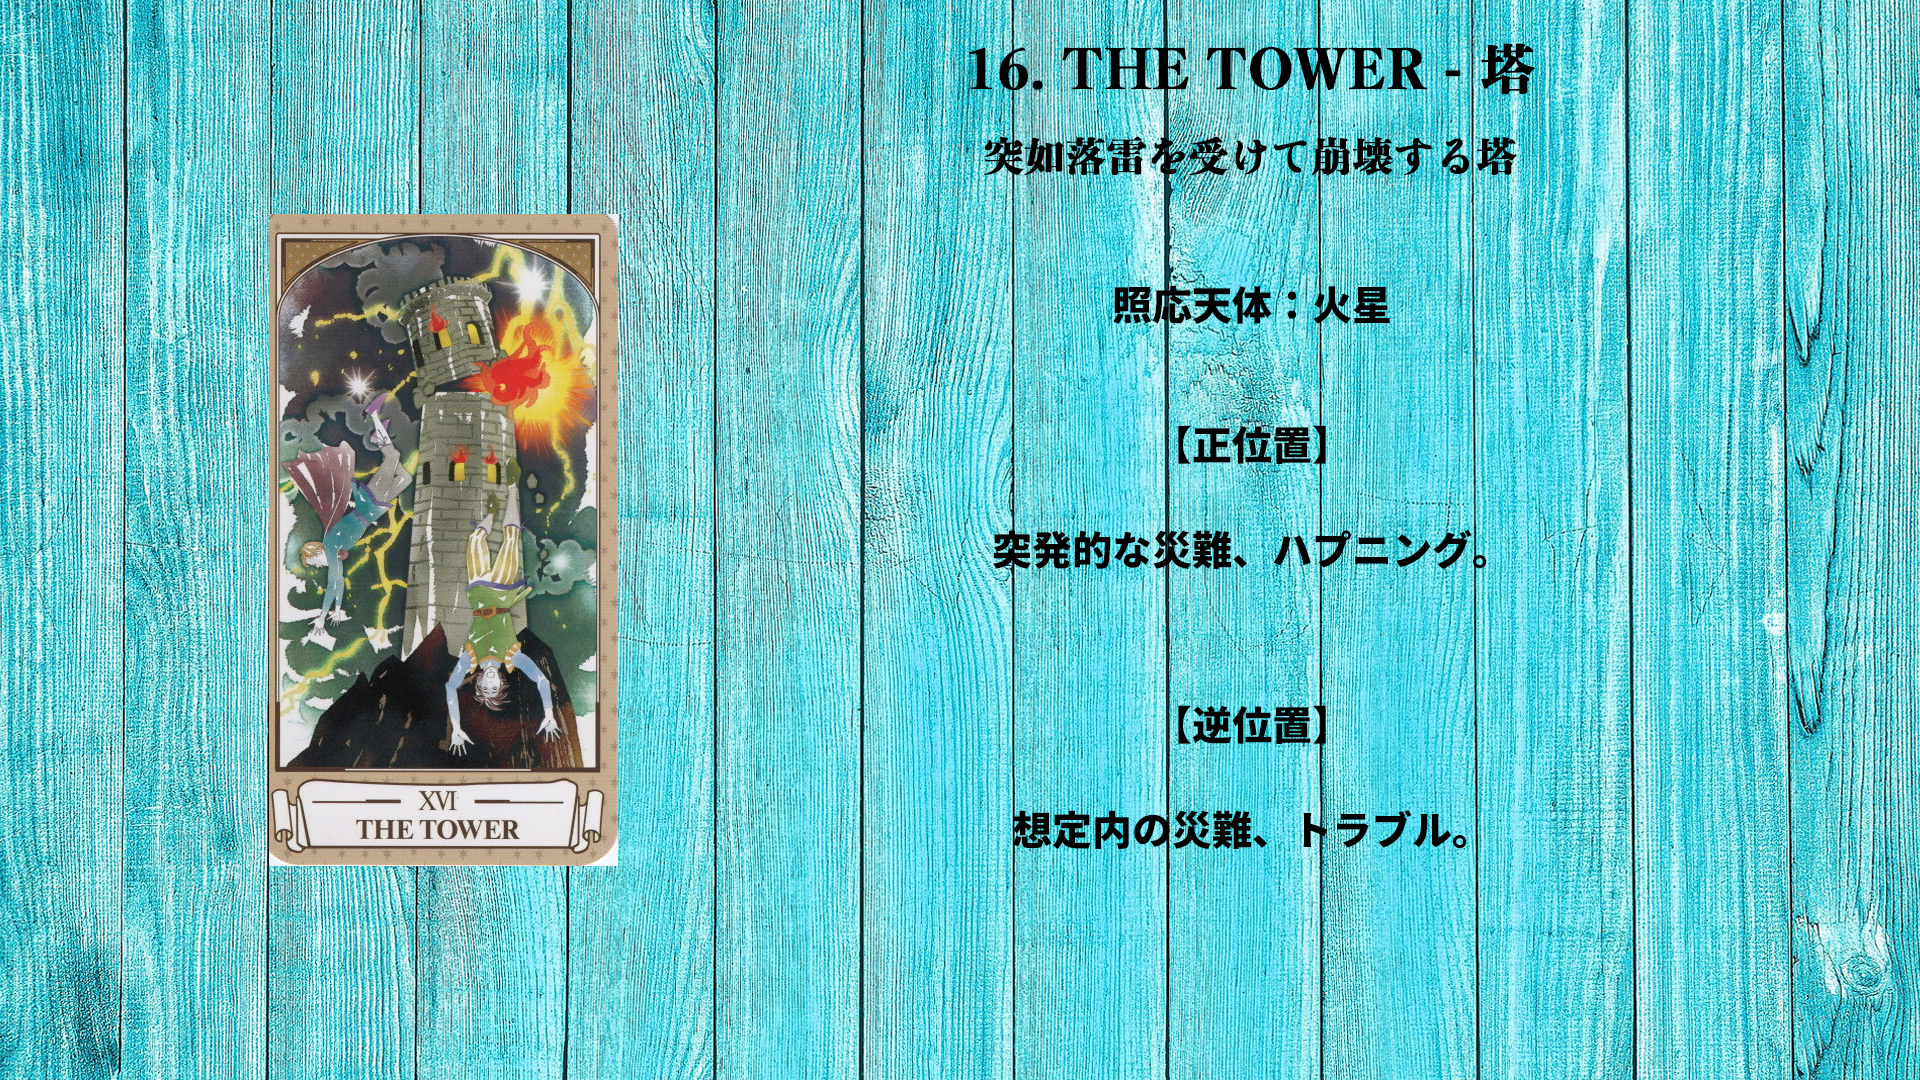 16_THE TOWER - 塔